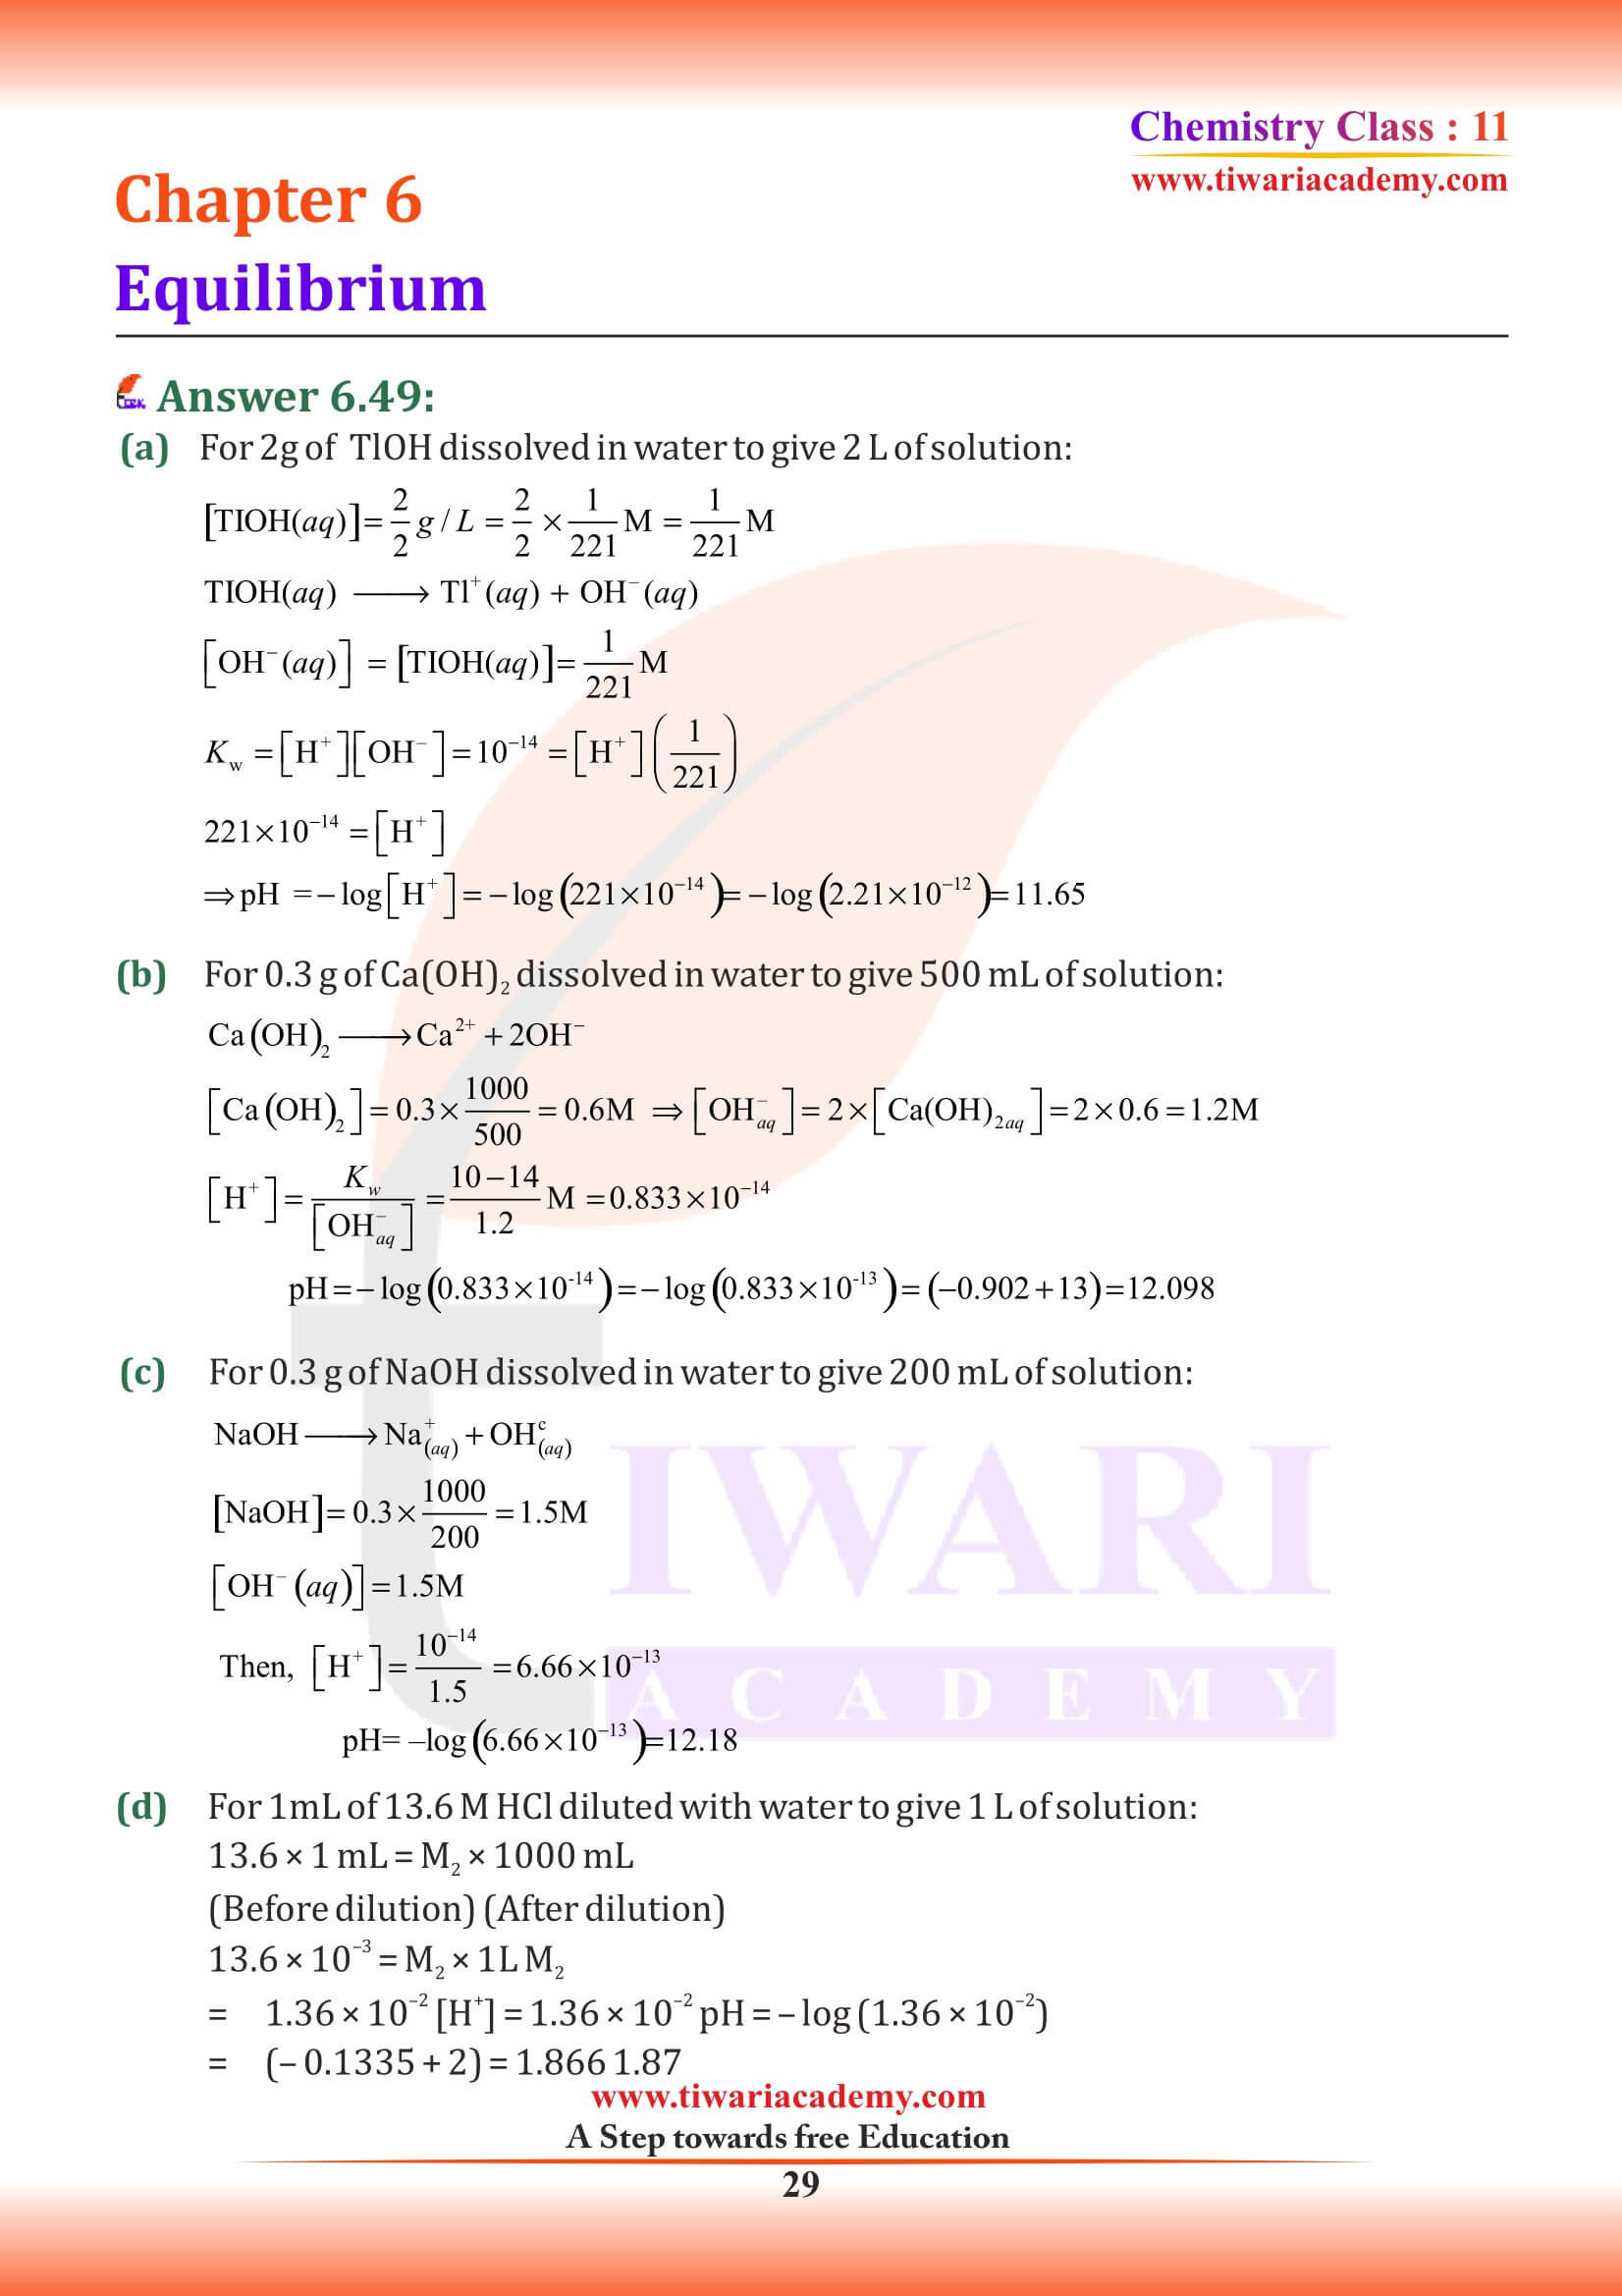 NCERT Class 11 Chemistry Chapter 6 free